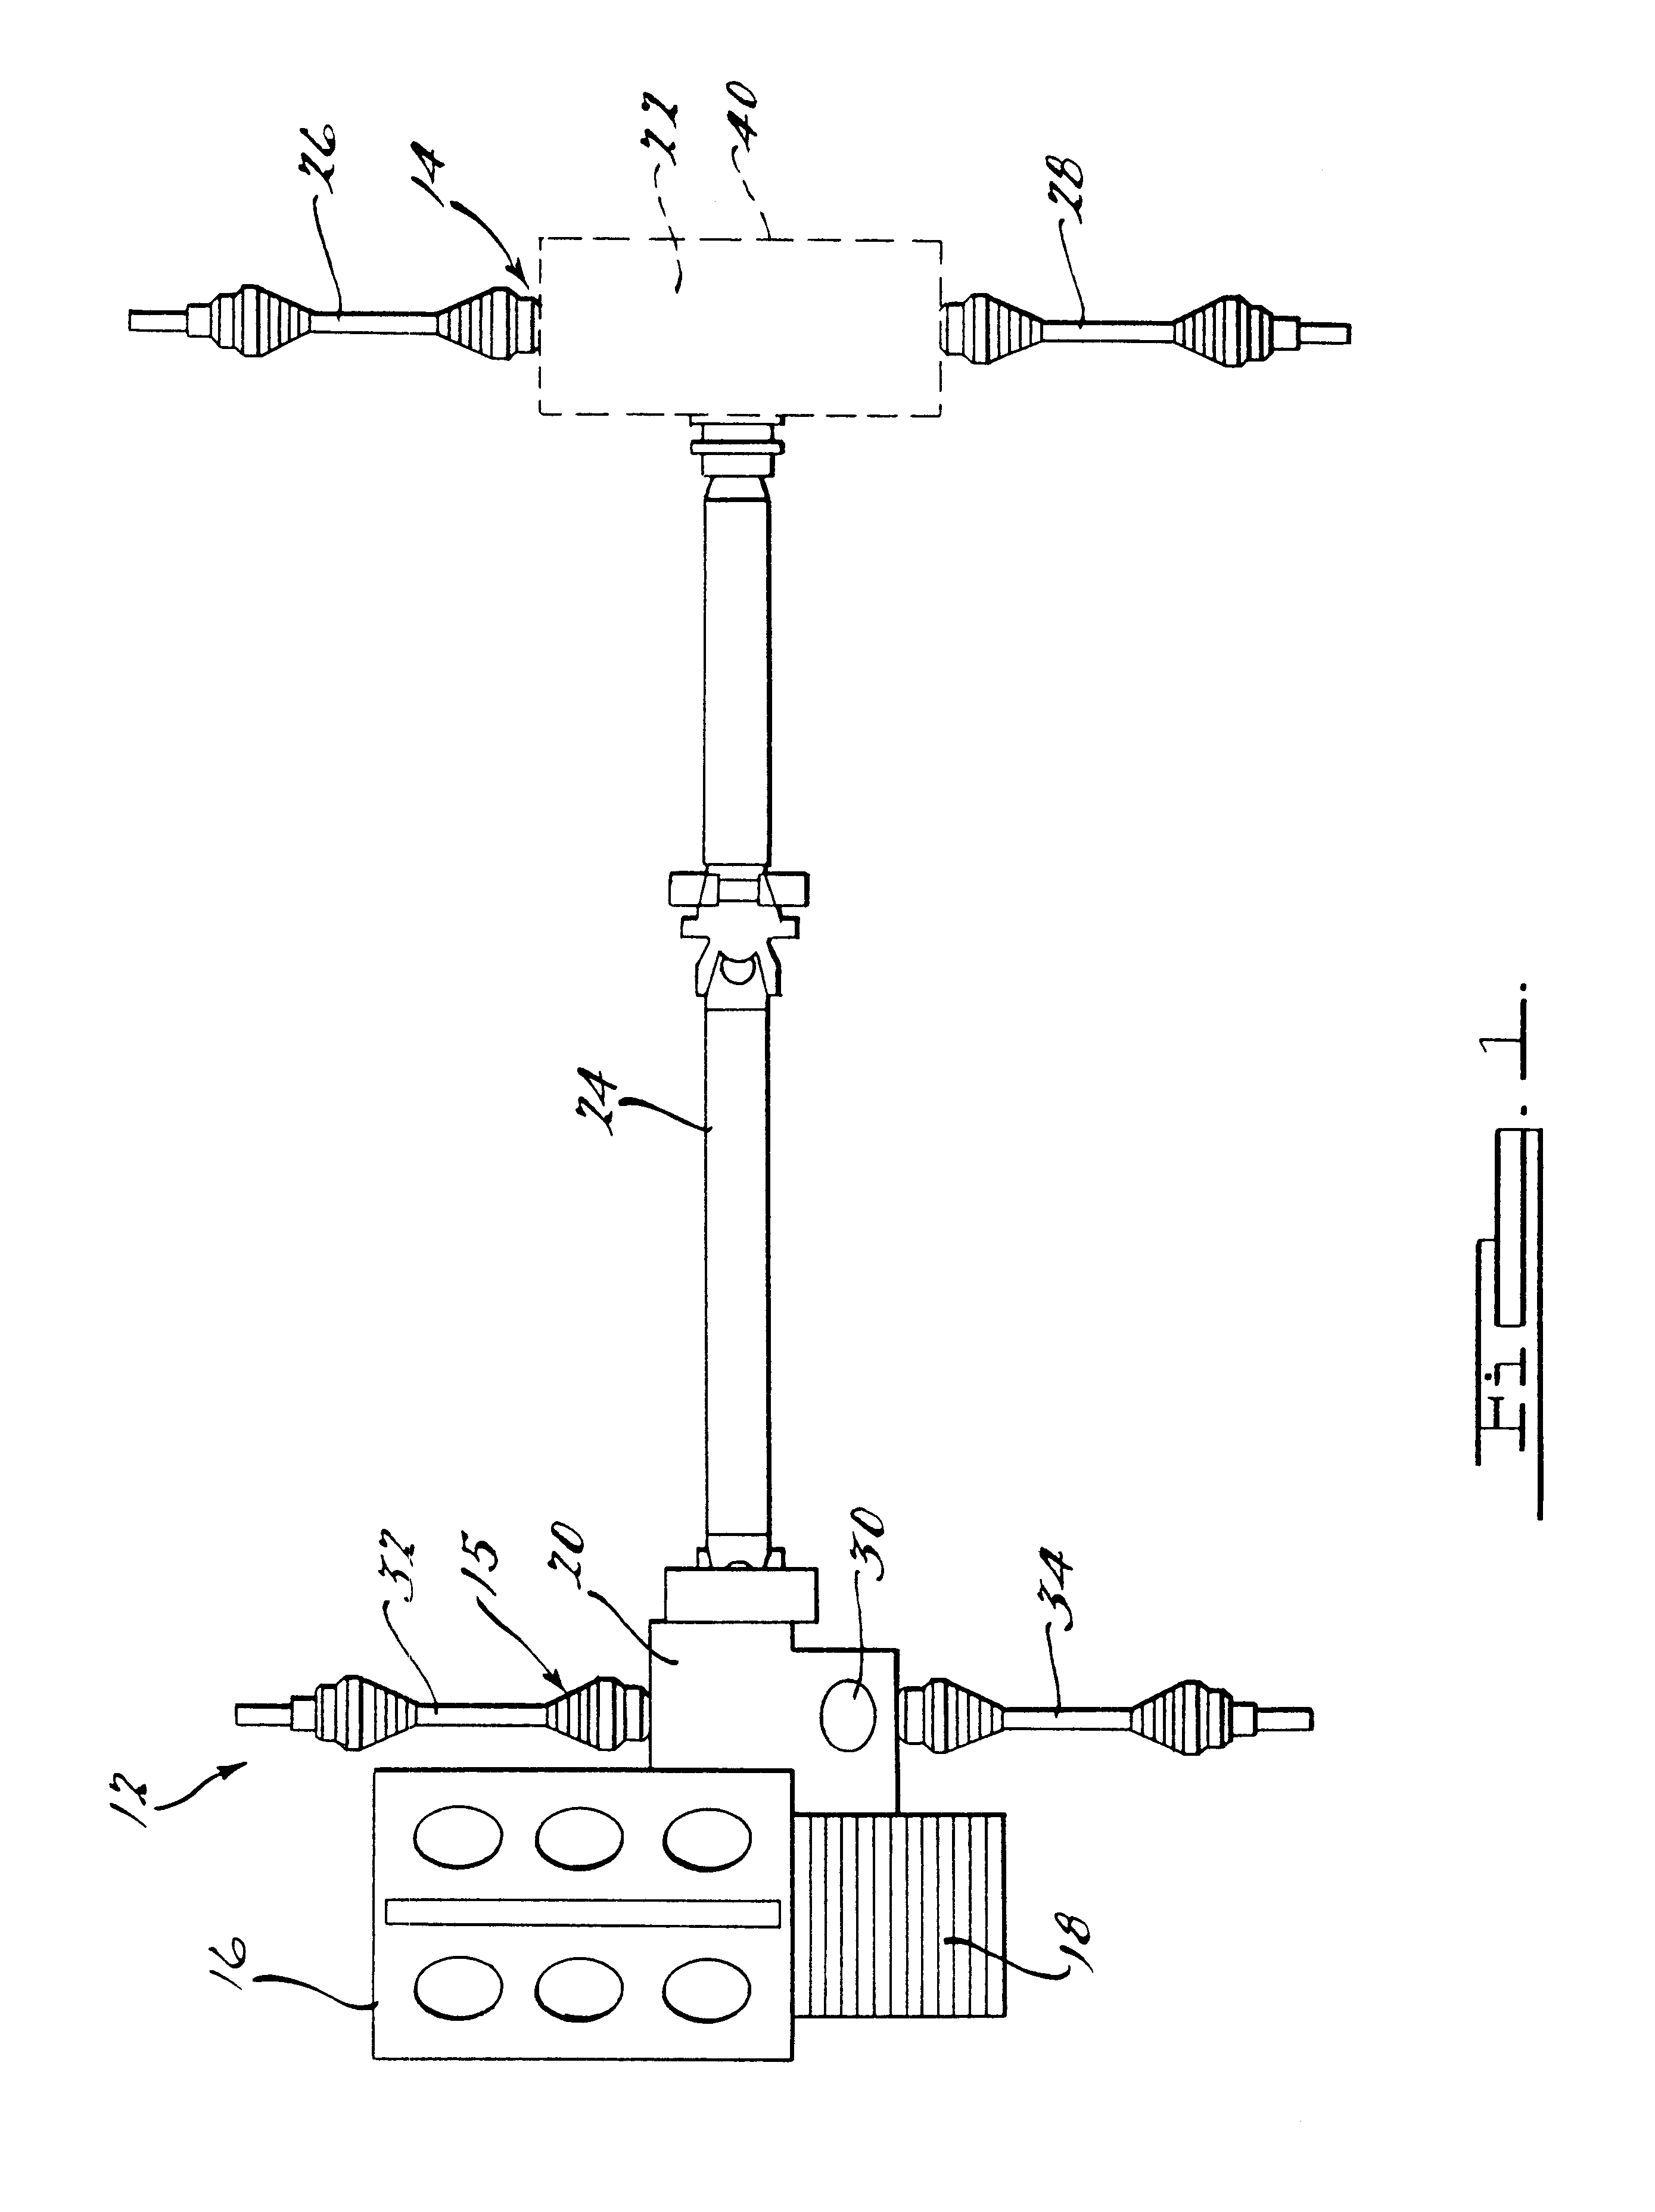 Engagement mechanism with two stage ramp angle